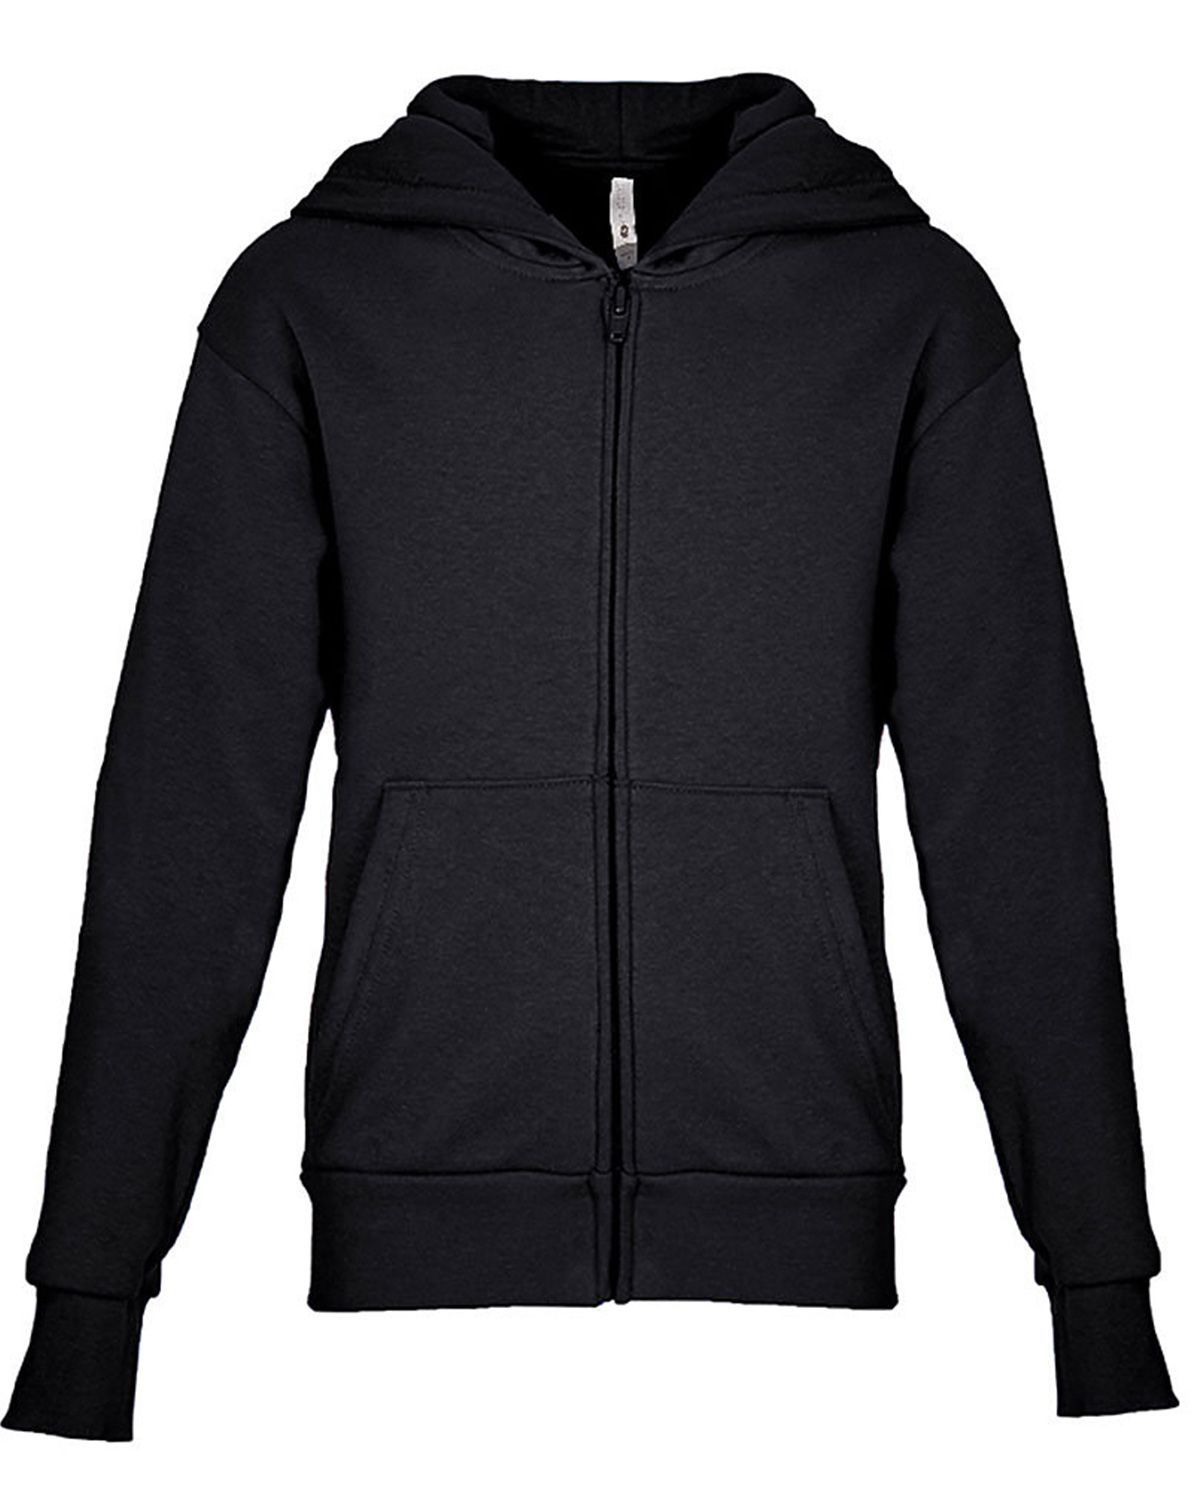 Next Level NL9103 Youth Zip Hoodie - Free Shipping Available